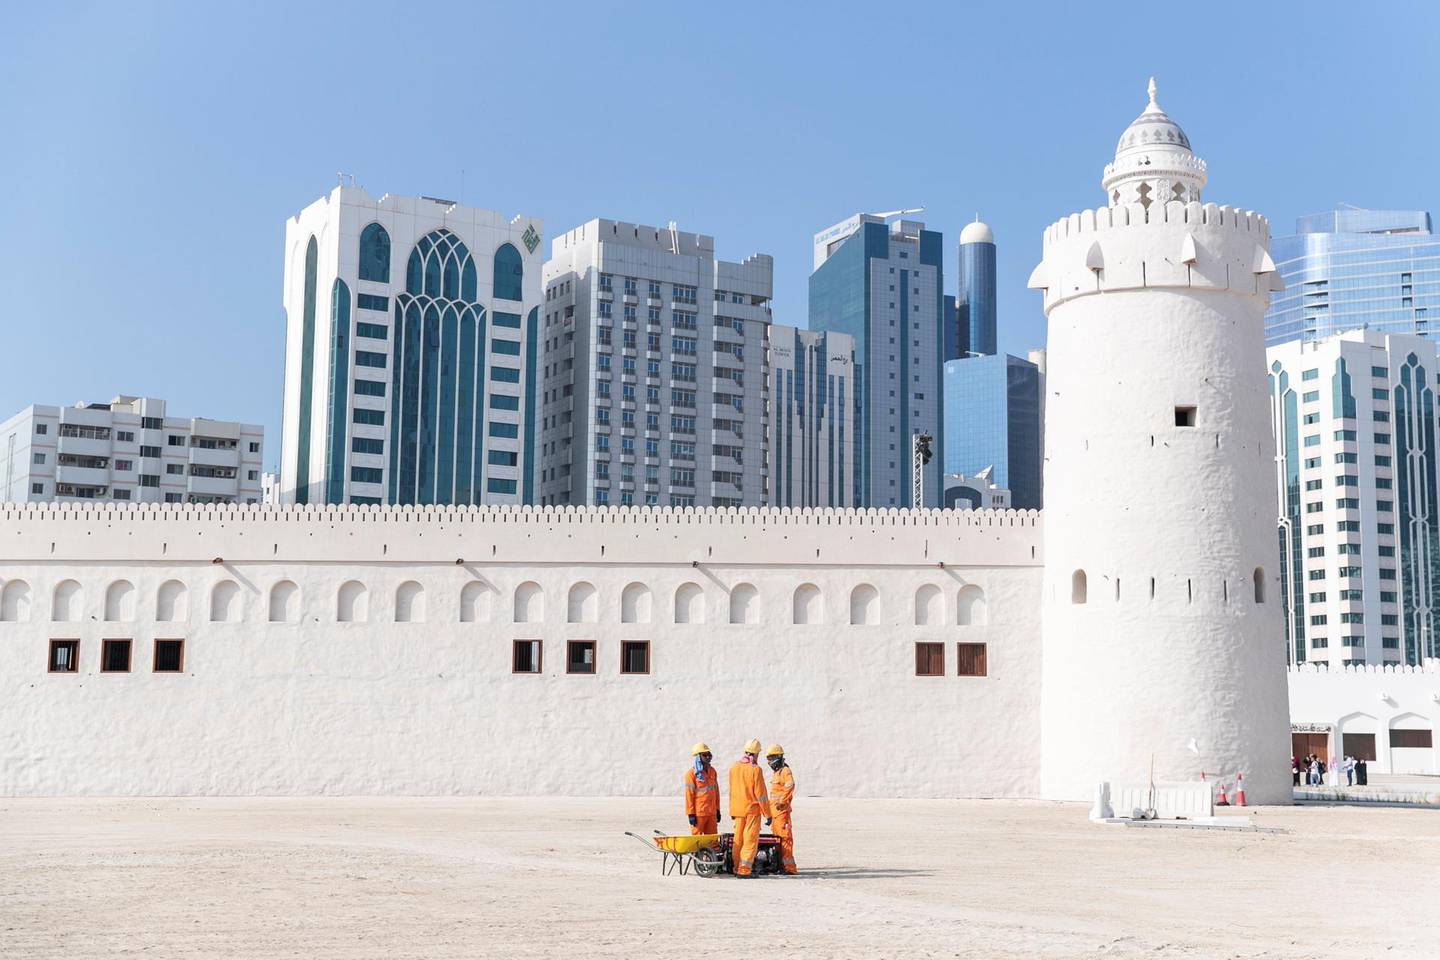 ABU DHABI, UNITED ARAB EMIRATES - DECEMBER 4, 2018. Qasr Al Hosn is the ancestral home of the Al Nahyan and the oldest building on Abu Dhabi Island.Qasr Al Hosn has witnessed the evolution of Abu Dhabi Island from a small coastal community to a world city. In that time, Qasr Al Hosn has been a fortified stronghold, a seat of rule, a royal home and a gathering place for the community.(Photo by Reem Mohammed/The National)Reporter: Section:  AC